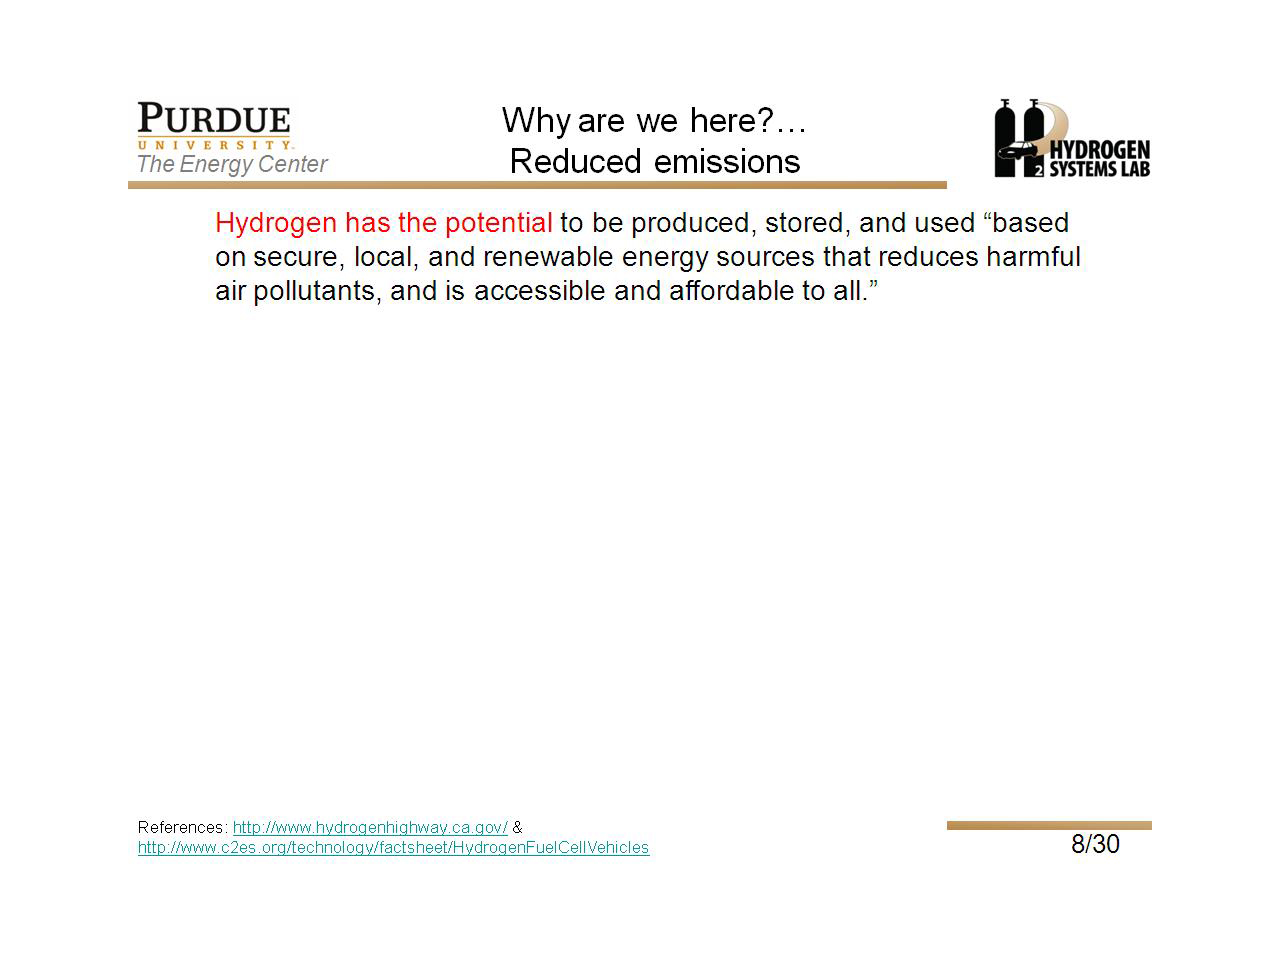 Why are we here?… Reduced emissions